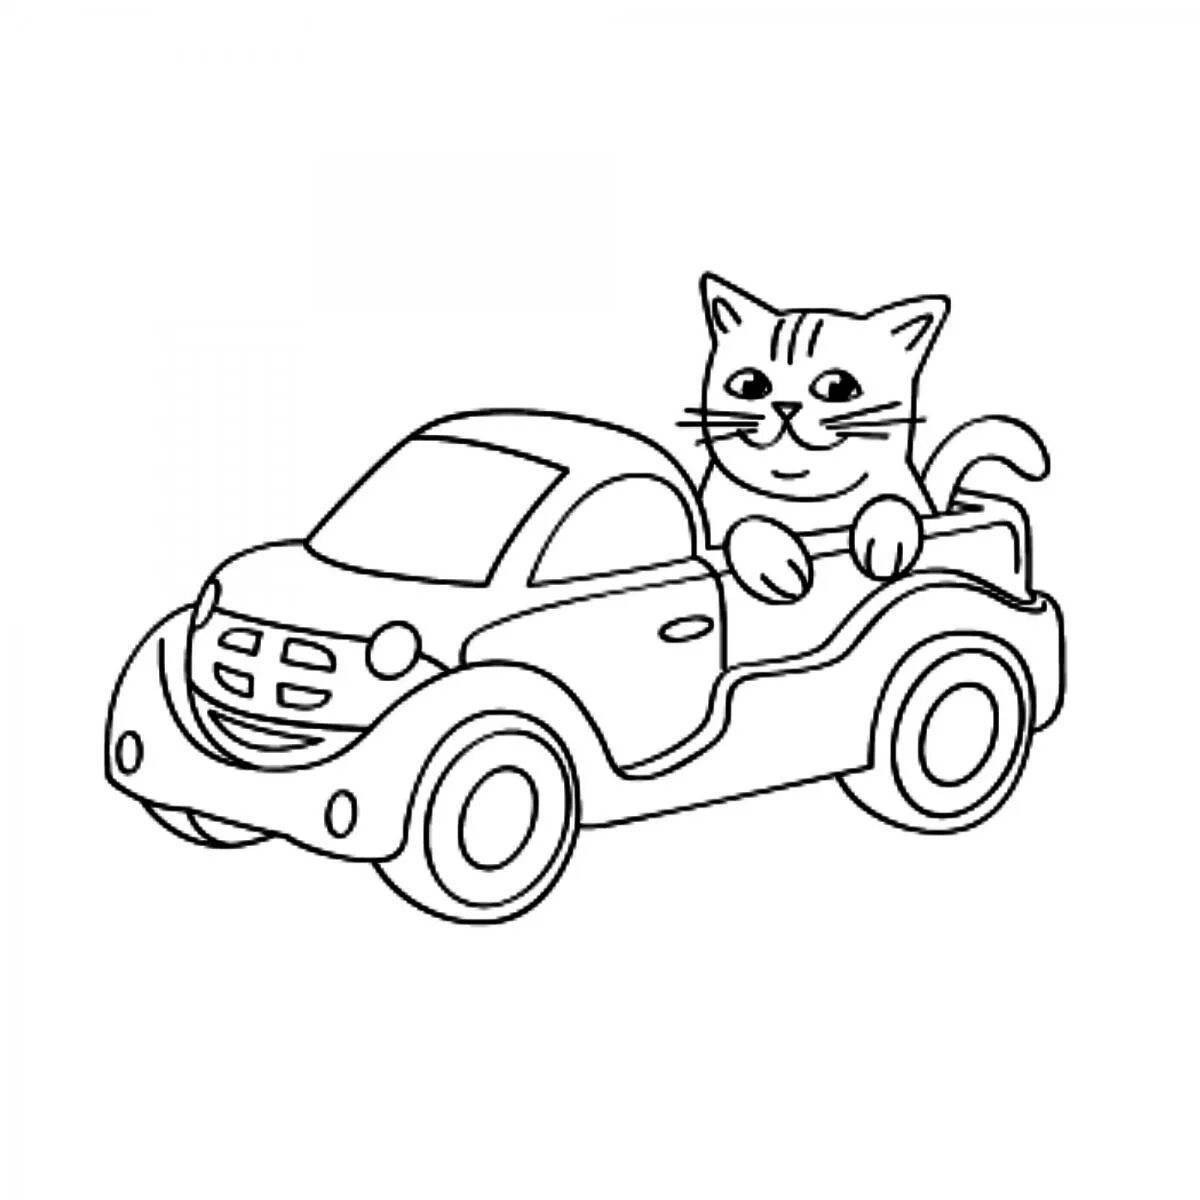 Playful cat coloring book for boys